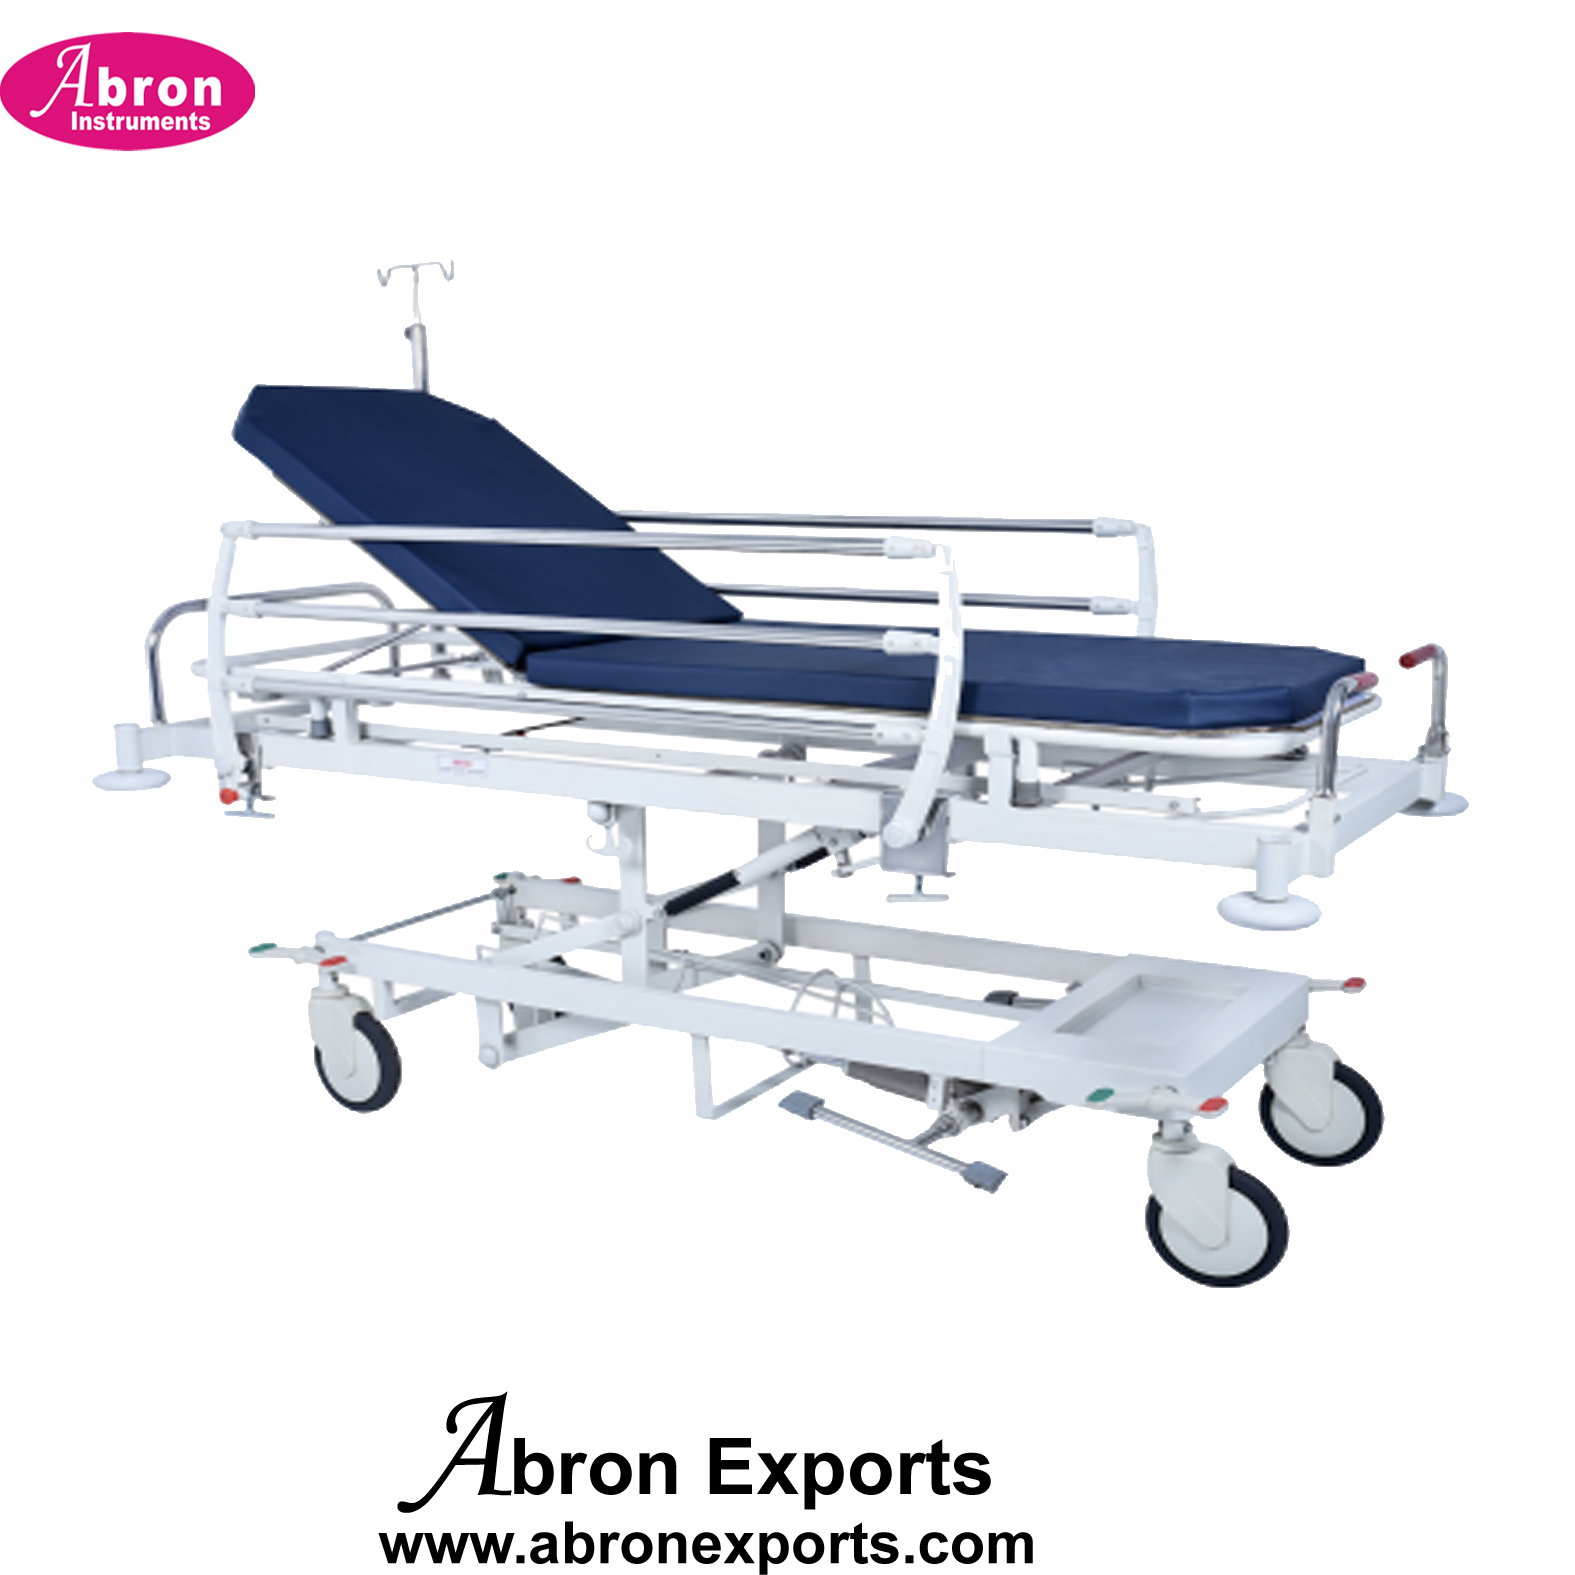 Patient Trolley Stretcher trolley with matress Emergency and Recovery Stretcher Trolley Hydraulic Abron ABM-2261-ST69 